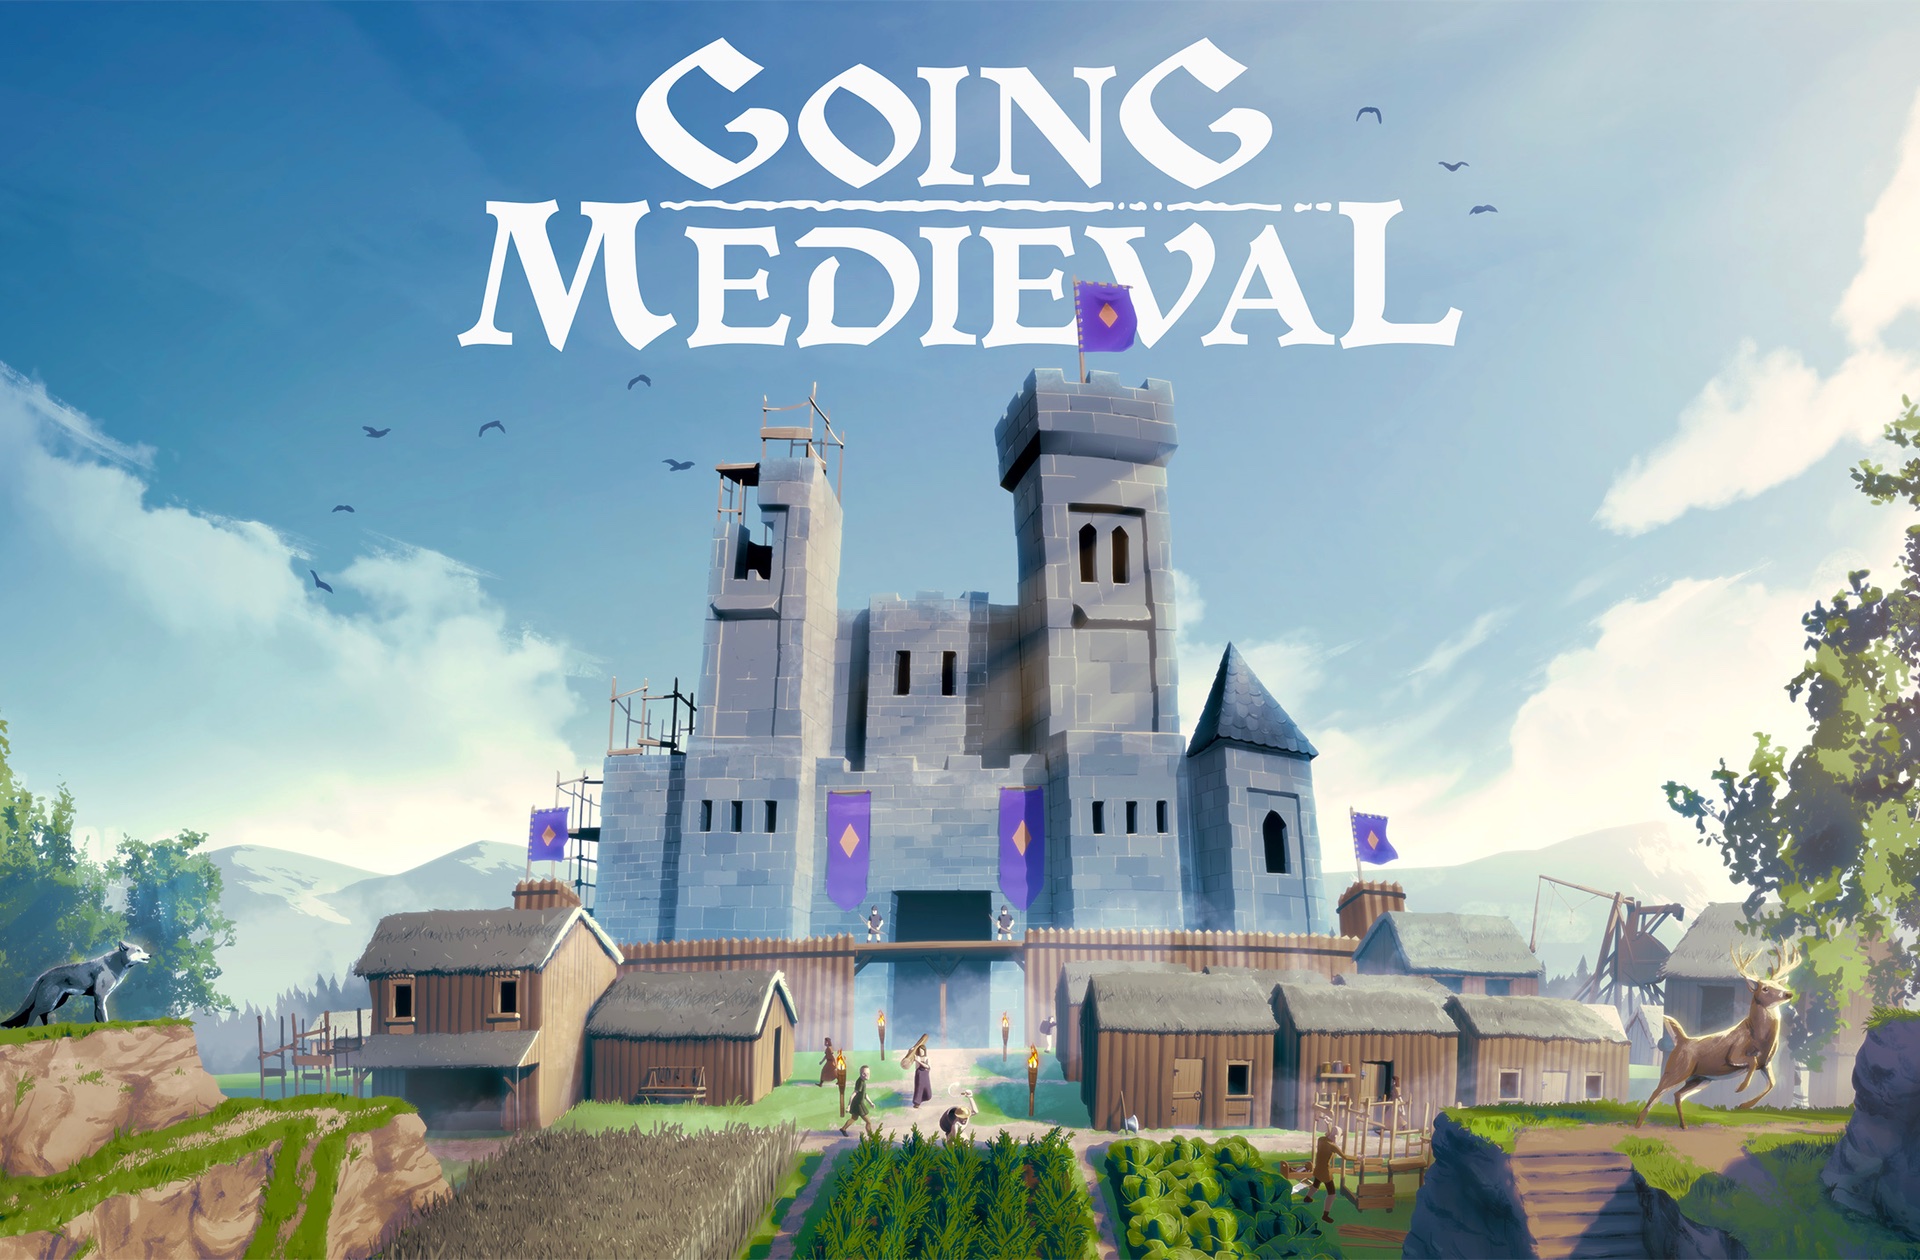 “Going Medieval”, the new management game that will absorb all your time